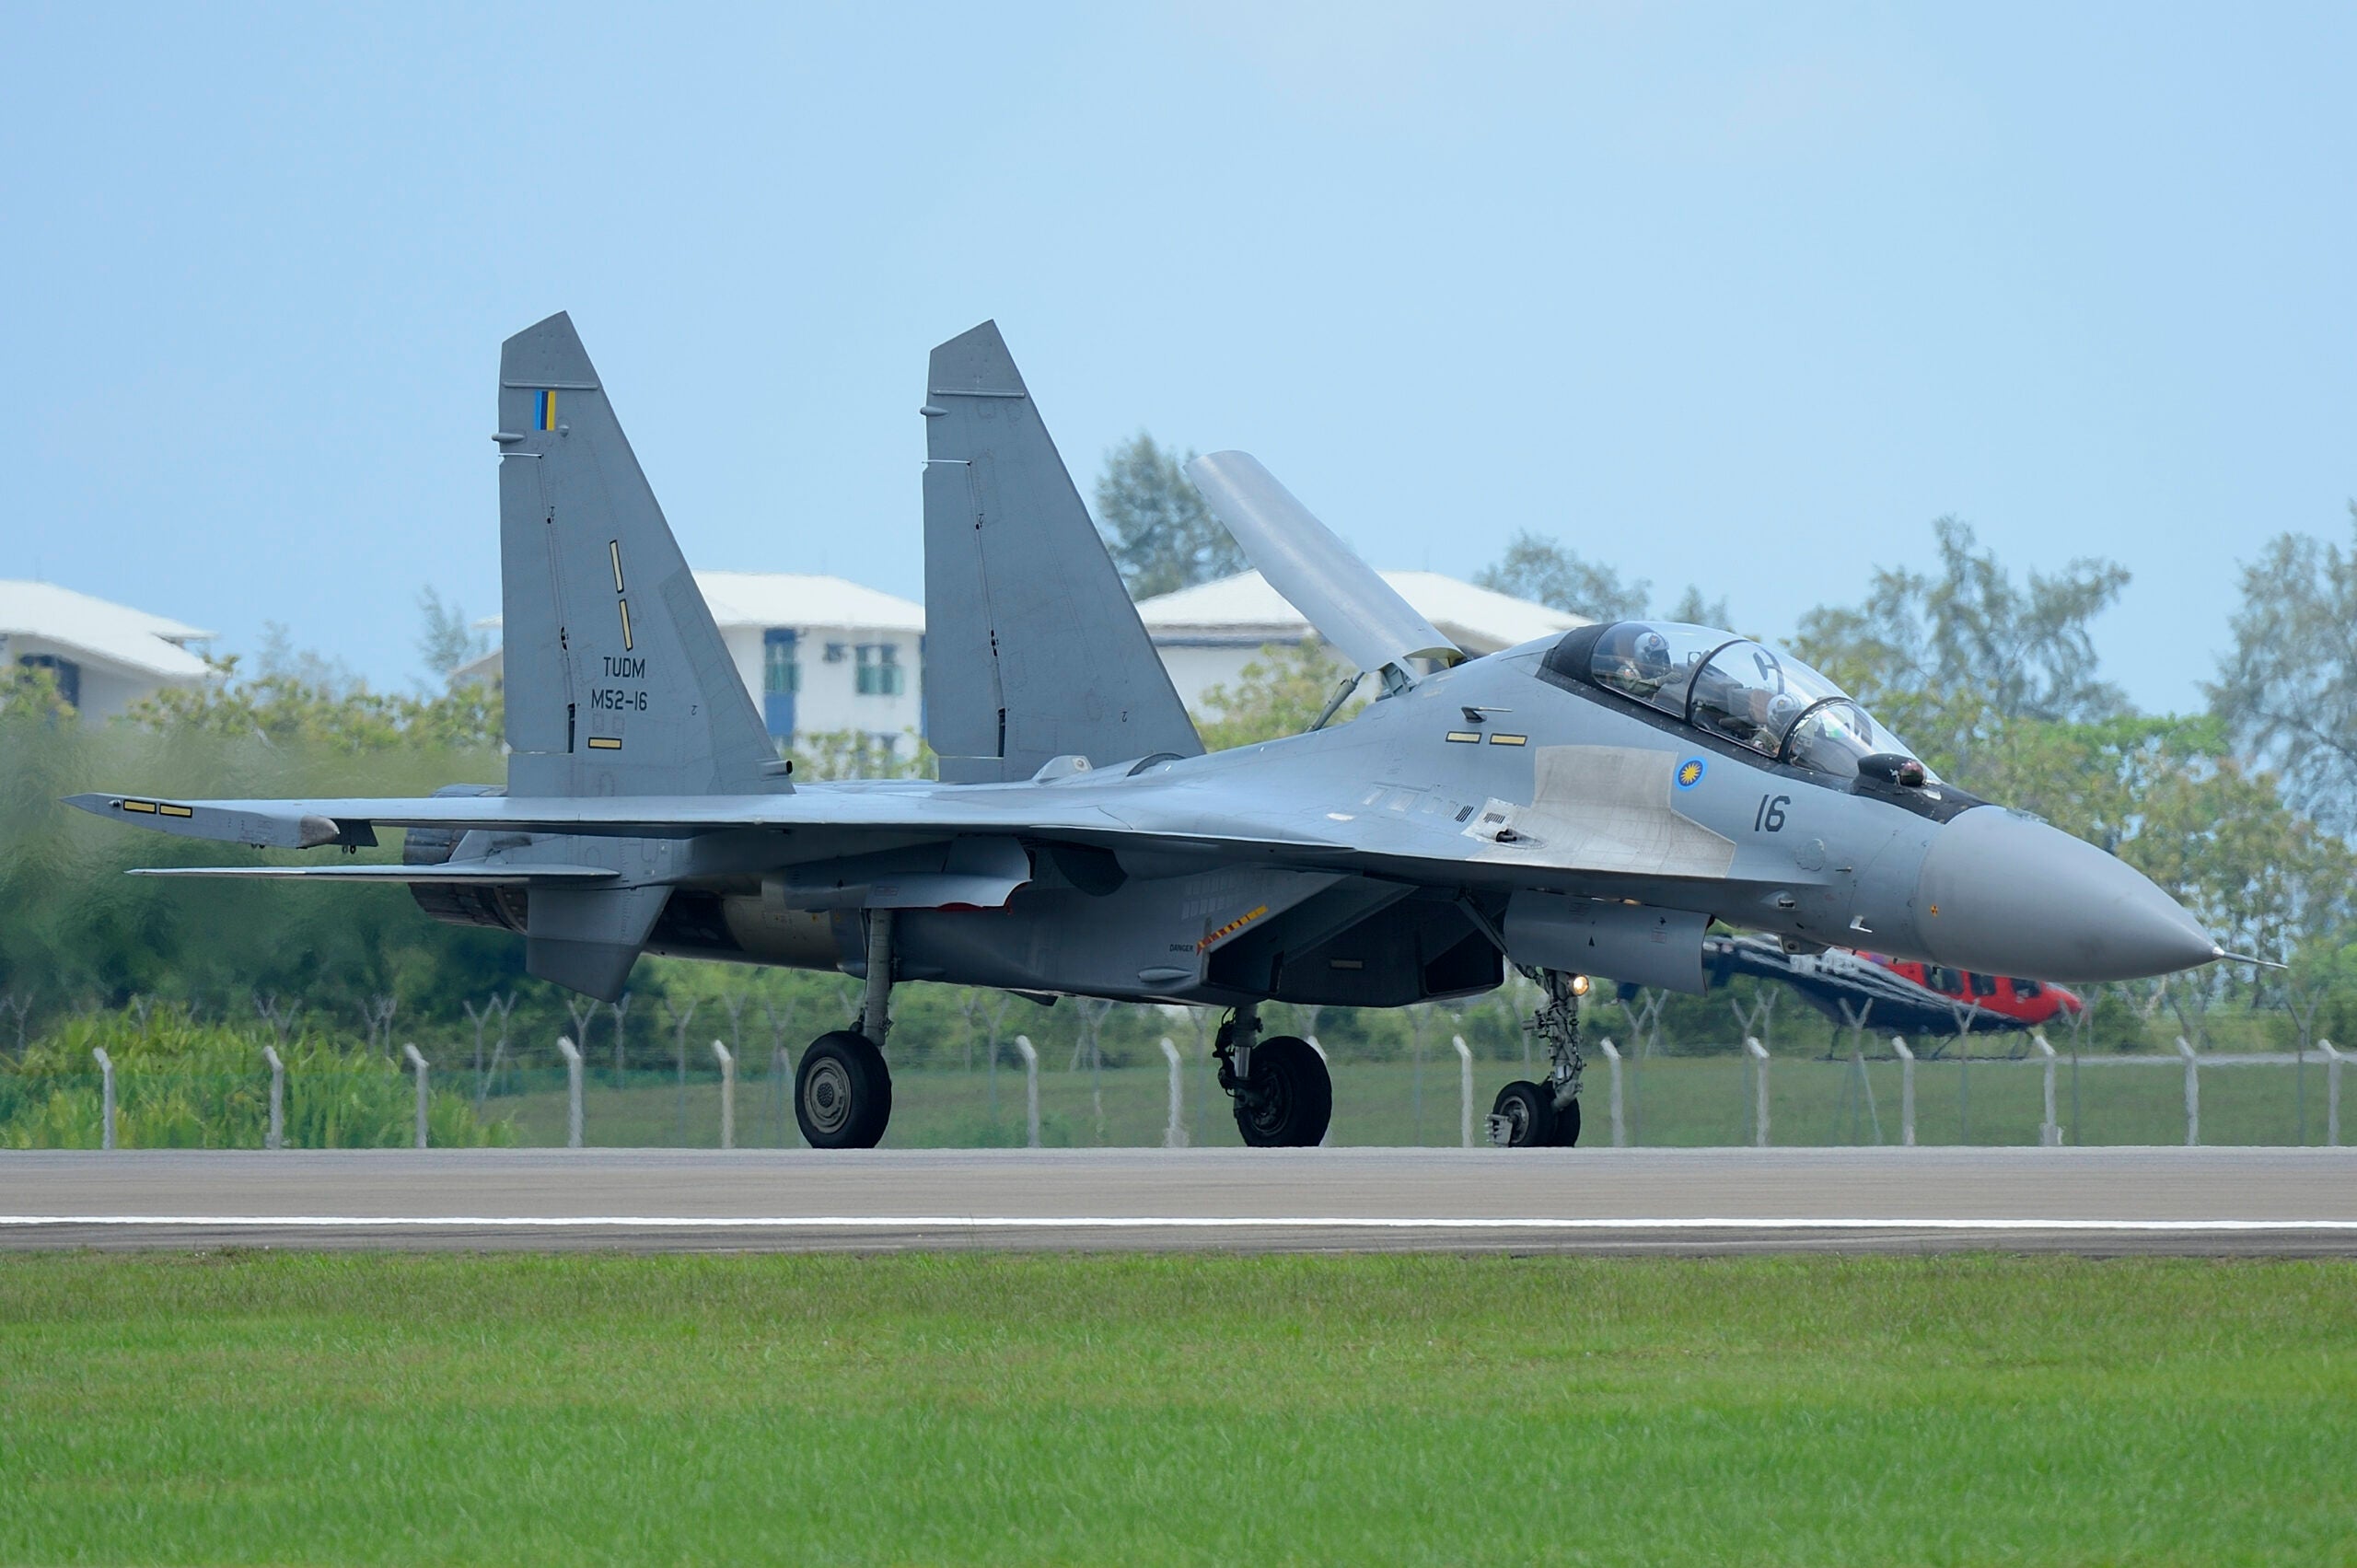 March 26, 2013 - A Sukhoi Su-30MKM Flanker of the Royal Malaysian Air Force landing at from Langkawi Airport, Malaysia.